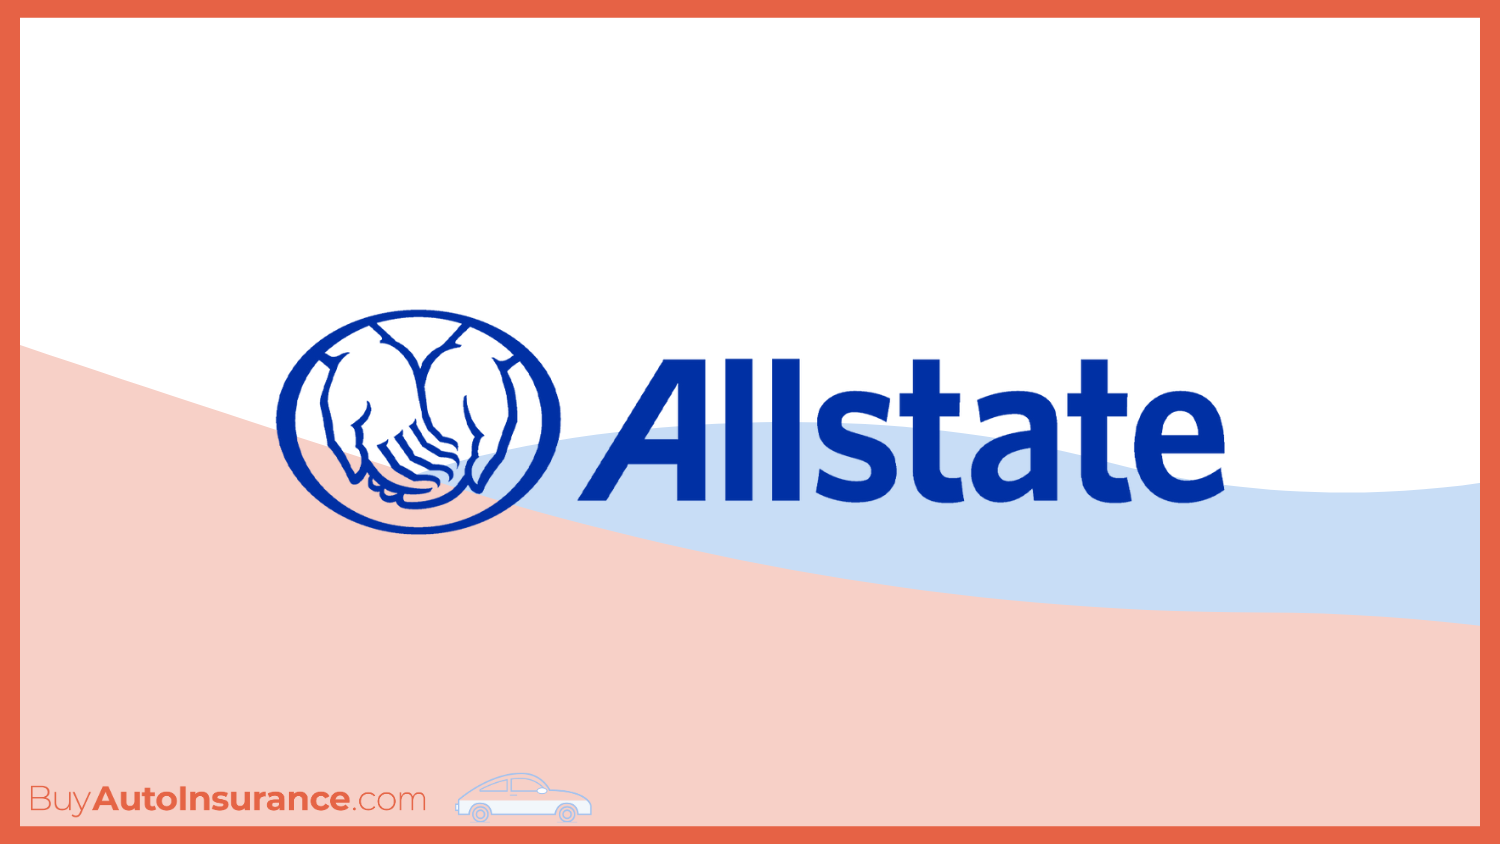 Cheap Auto Insurance Companies That Don't Monitor Your Driving: Allstate